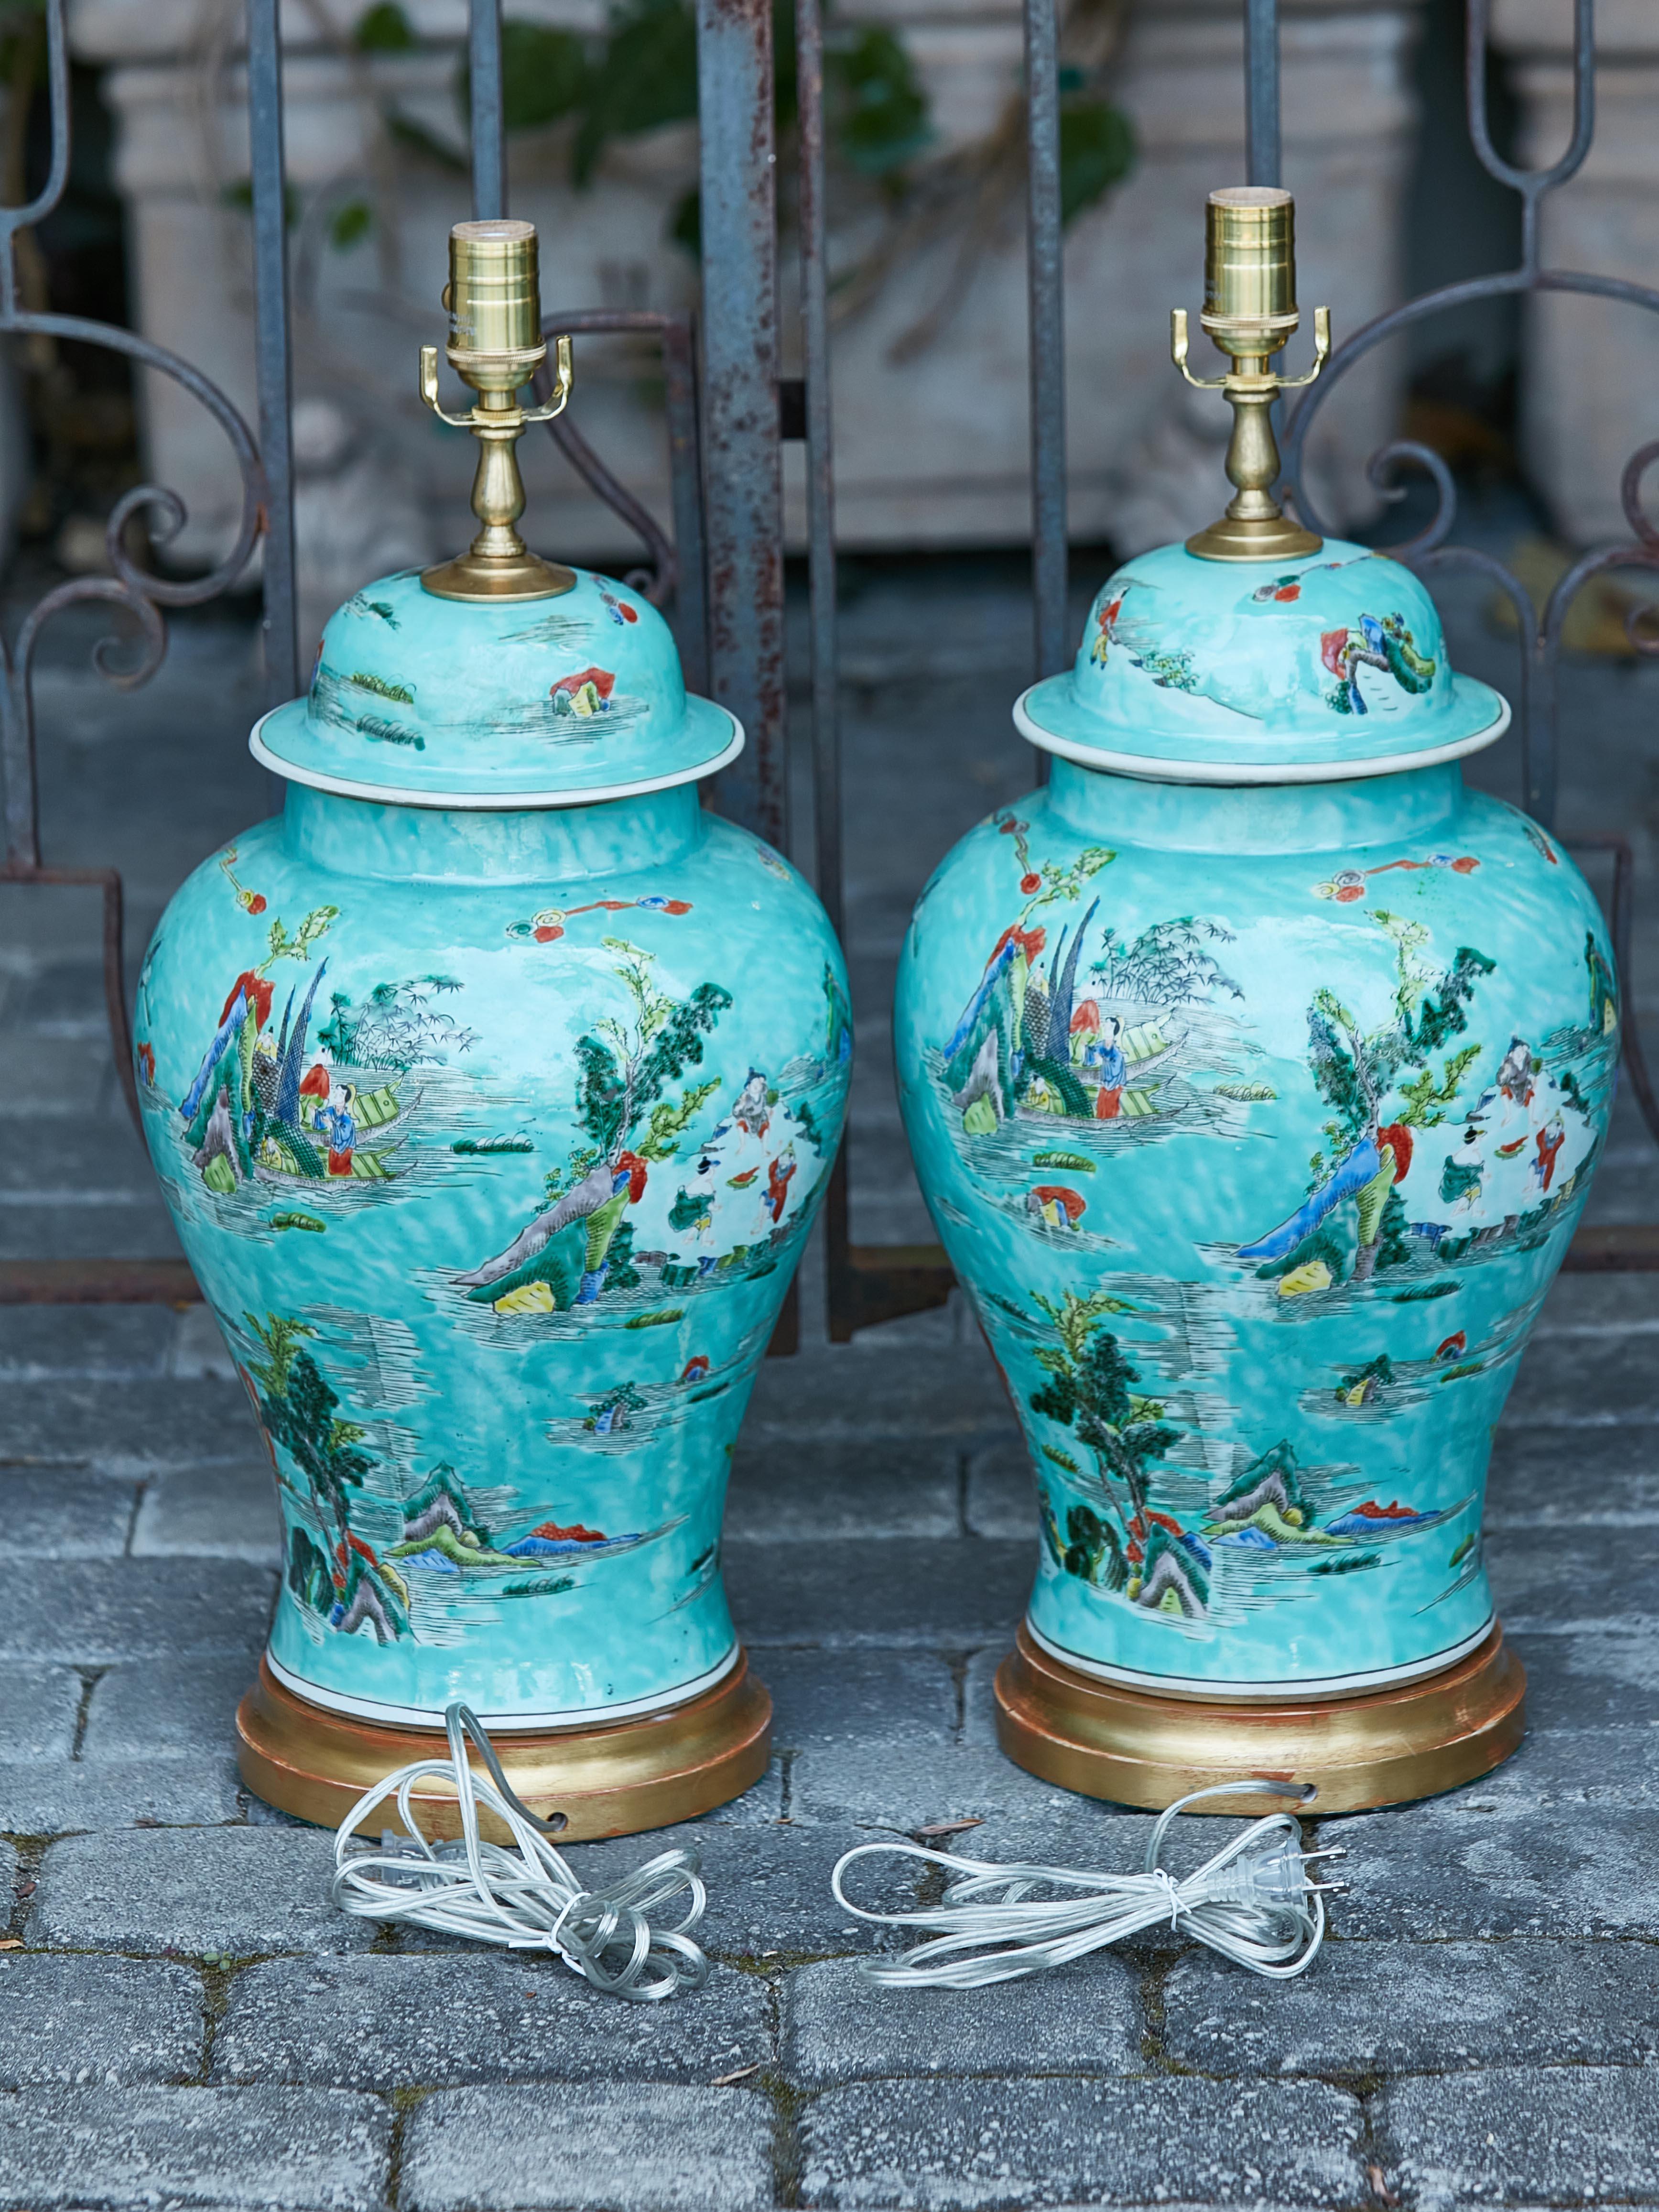 A pair of contemporary Asian lidded urns table lamps from the 21st century with turquoise ground and painted scenes, on circular gilded wooden bases. Infuse your interiors with an aura of Eastern enchantment through this stunning pair of